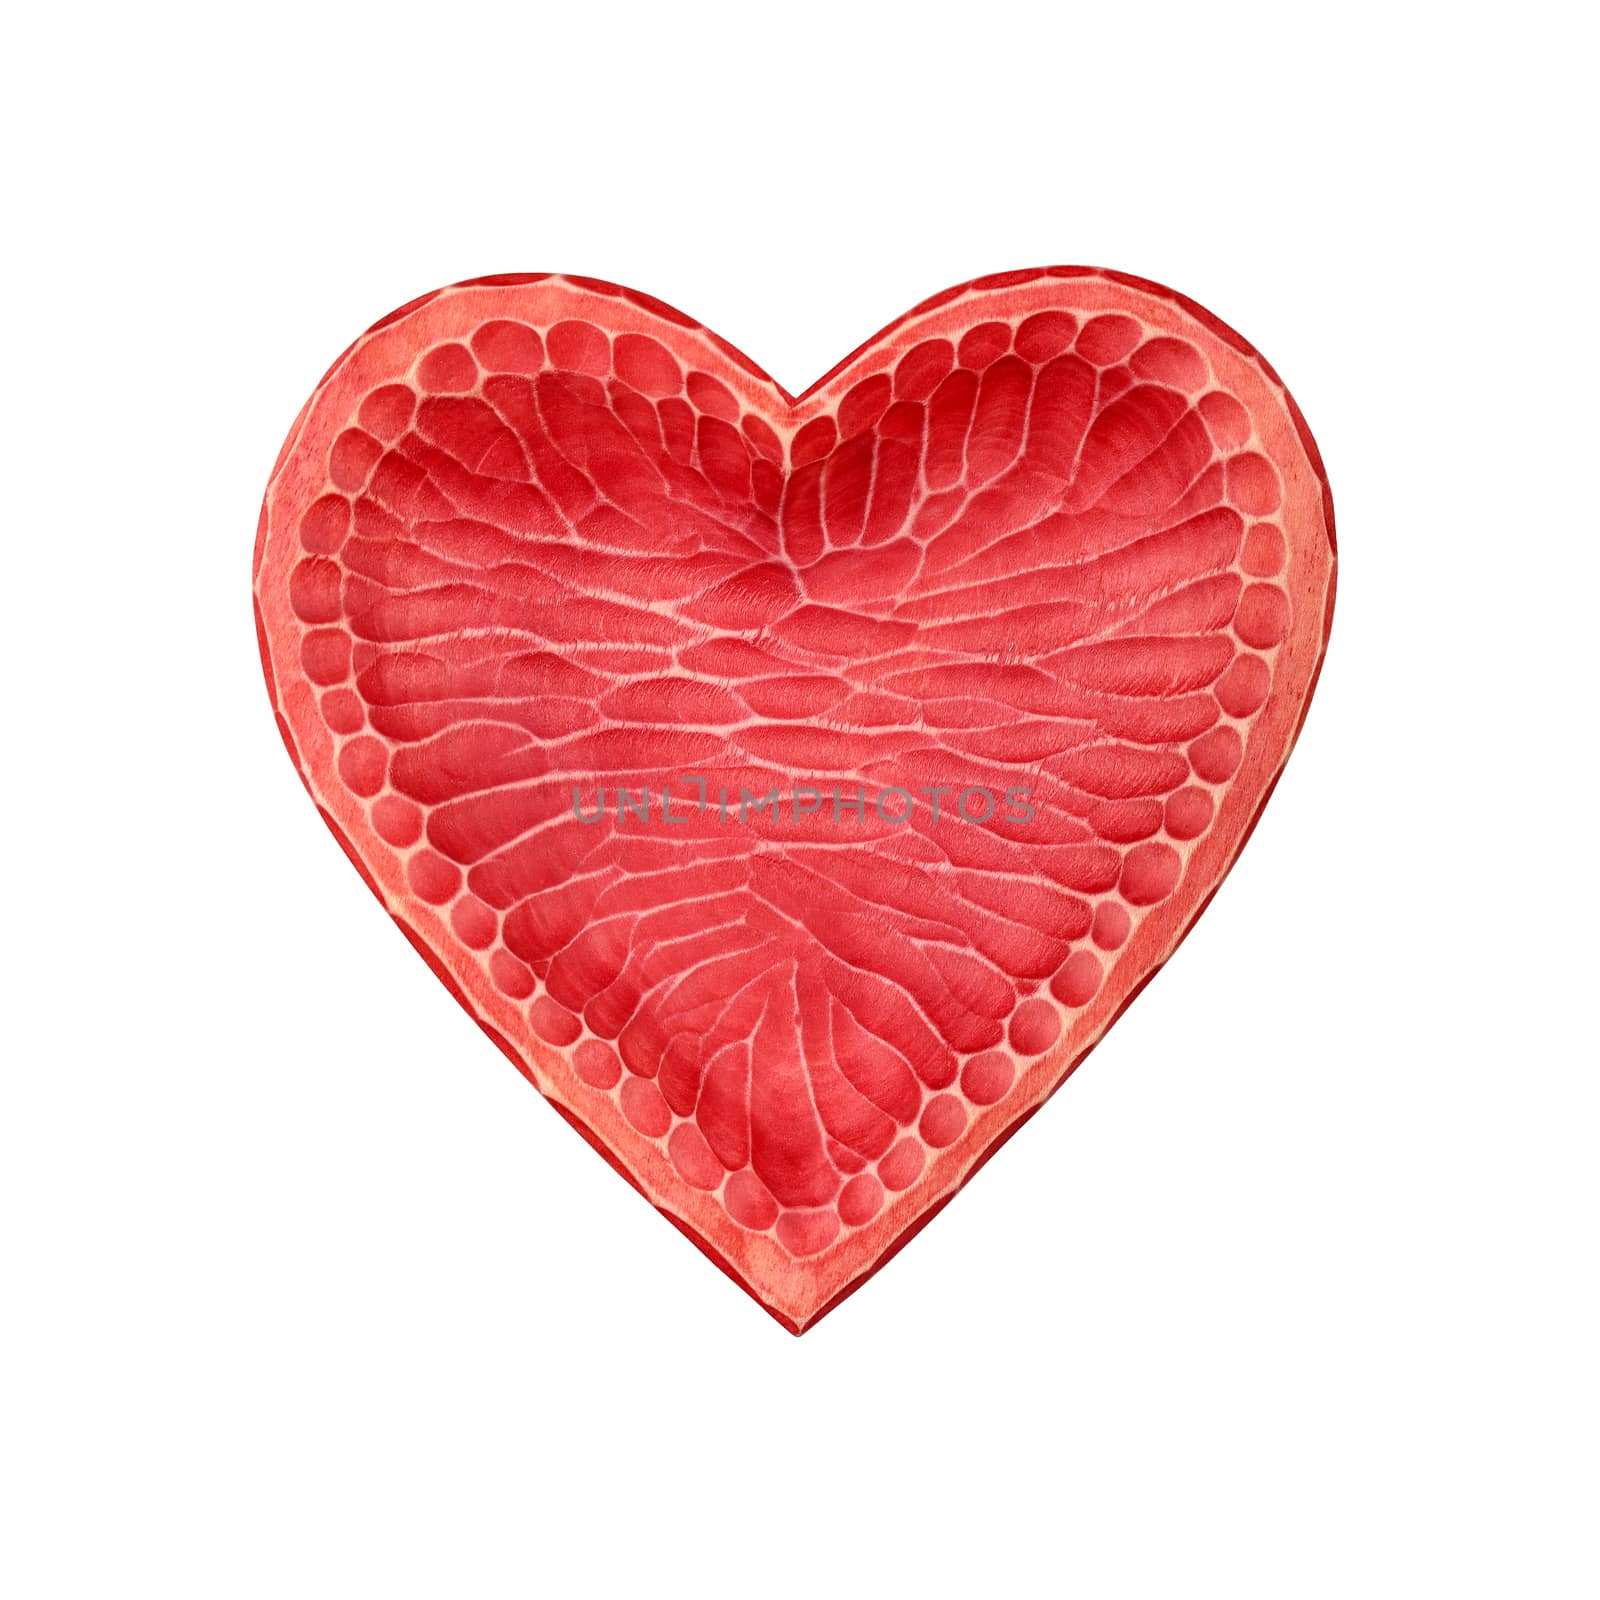 Red wooden heart shaped bowl isolated on white by BreakingTheWalls